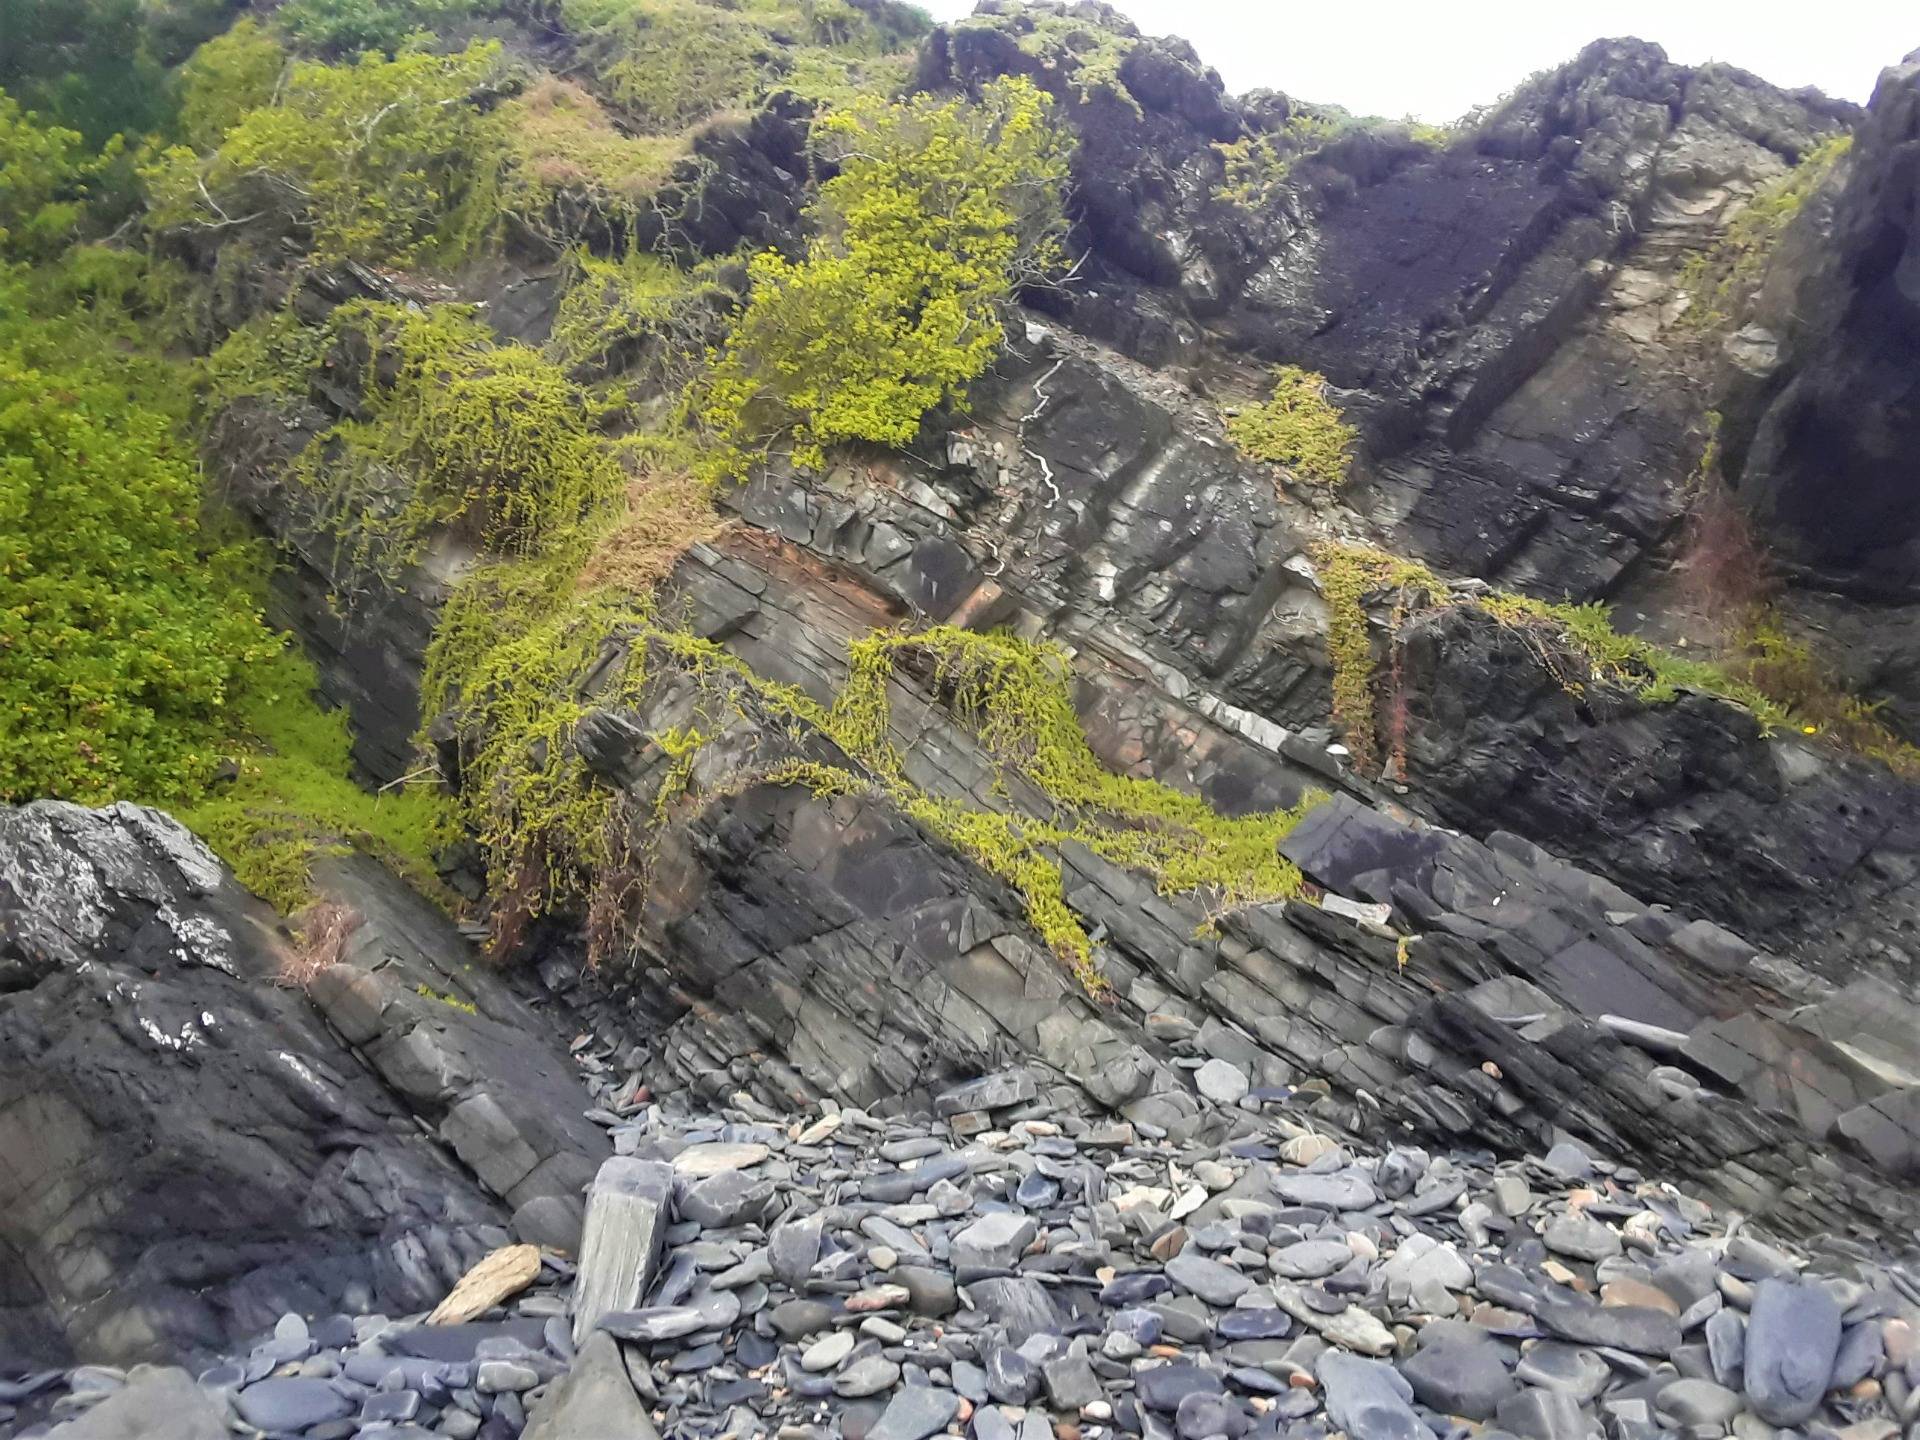 A dash of green from the prolific foliage that covers the granite rock right up to the beach